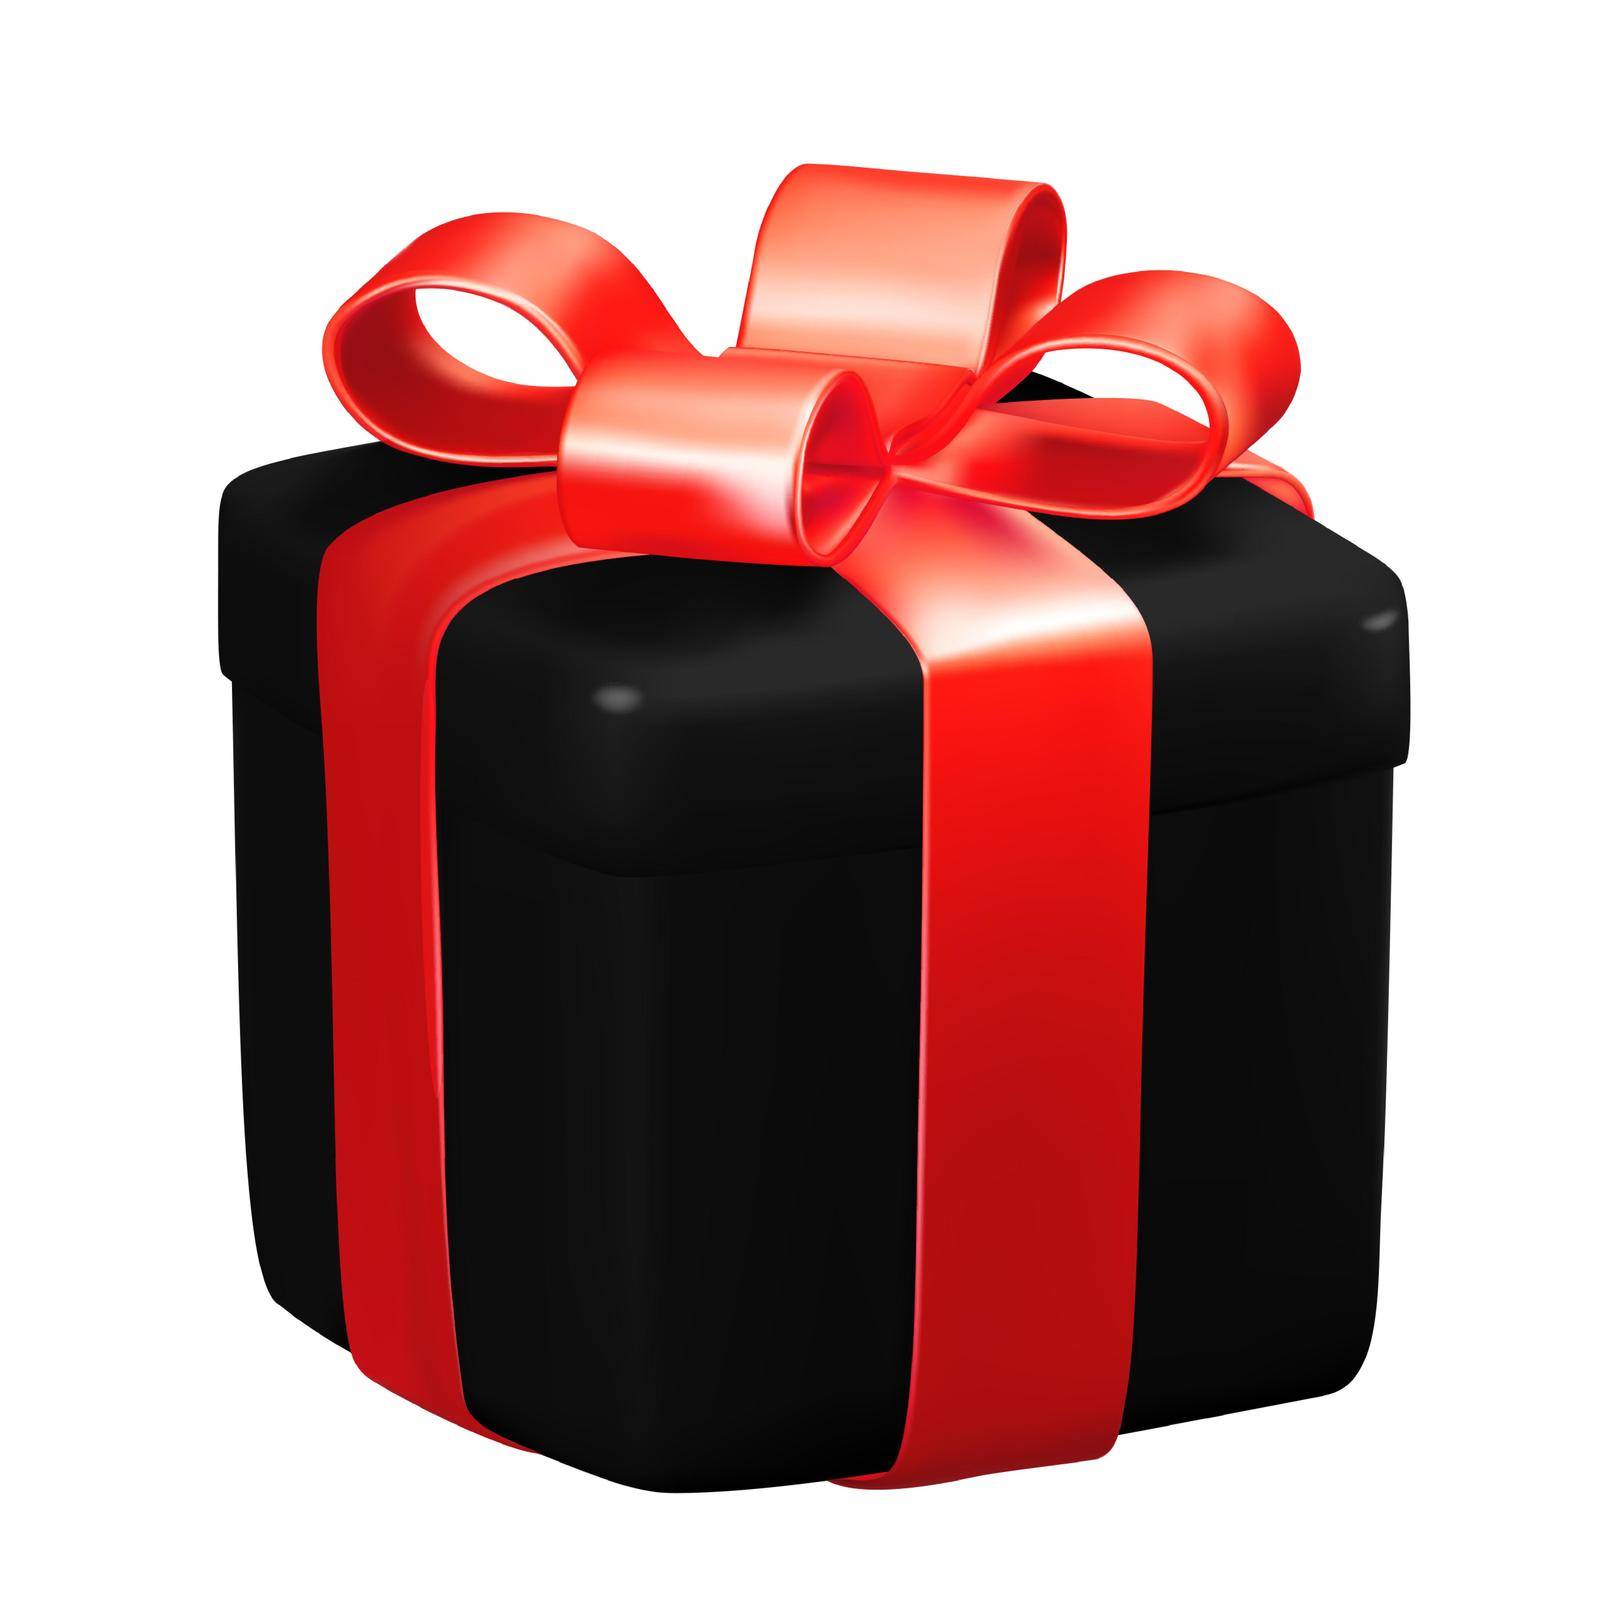 Black Gift Box with Red Ribbon. Vector Illustration.